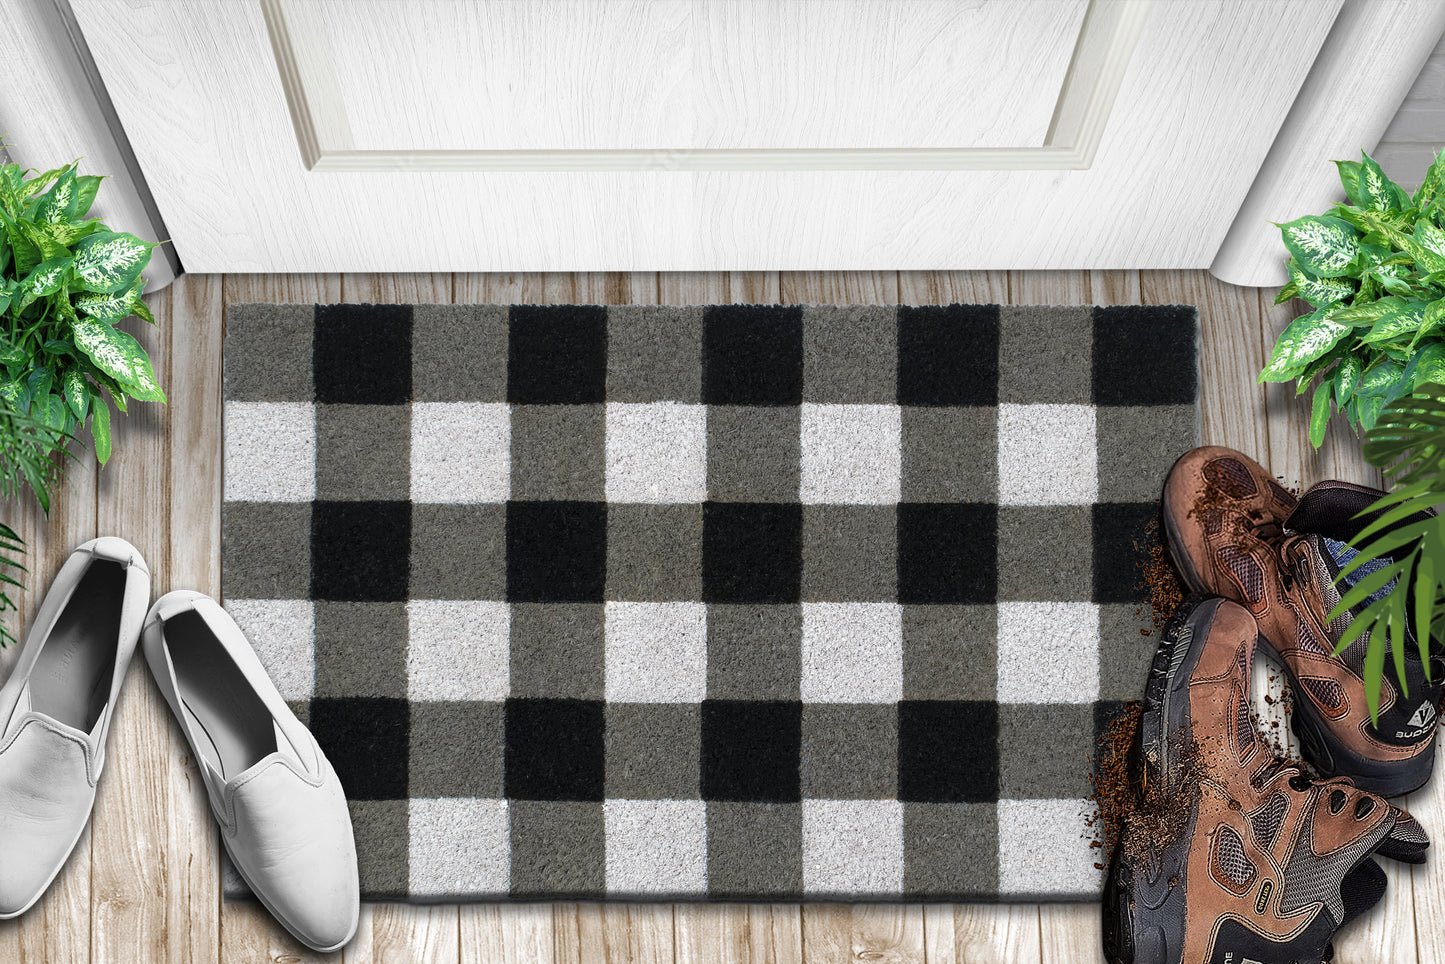 Classic Black and White Checkered 28 in. x 18 in. Indoor and Outdoor Doormat